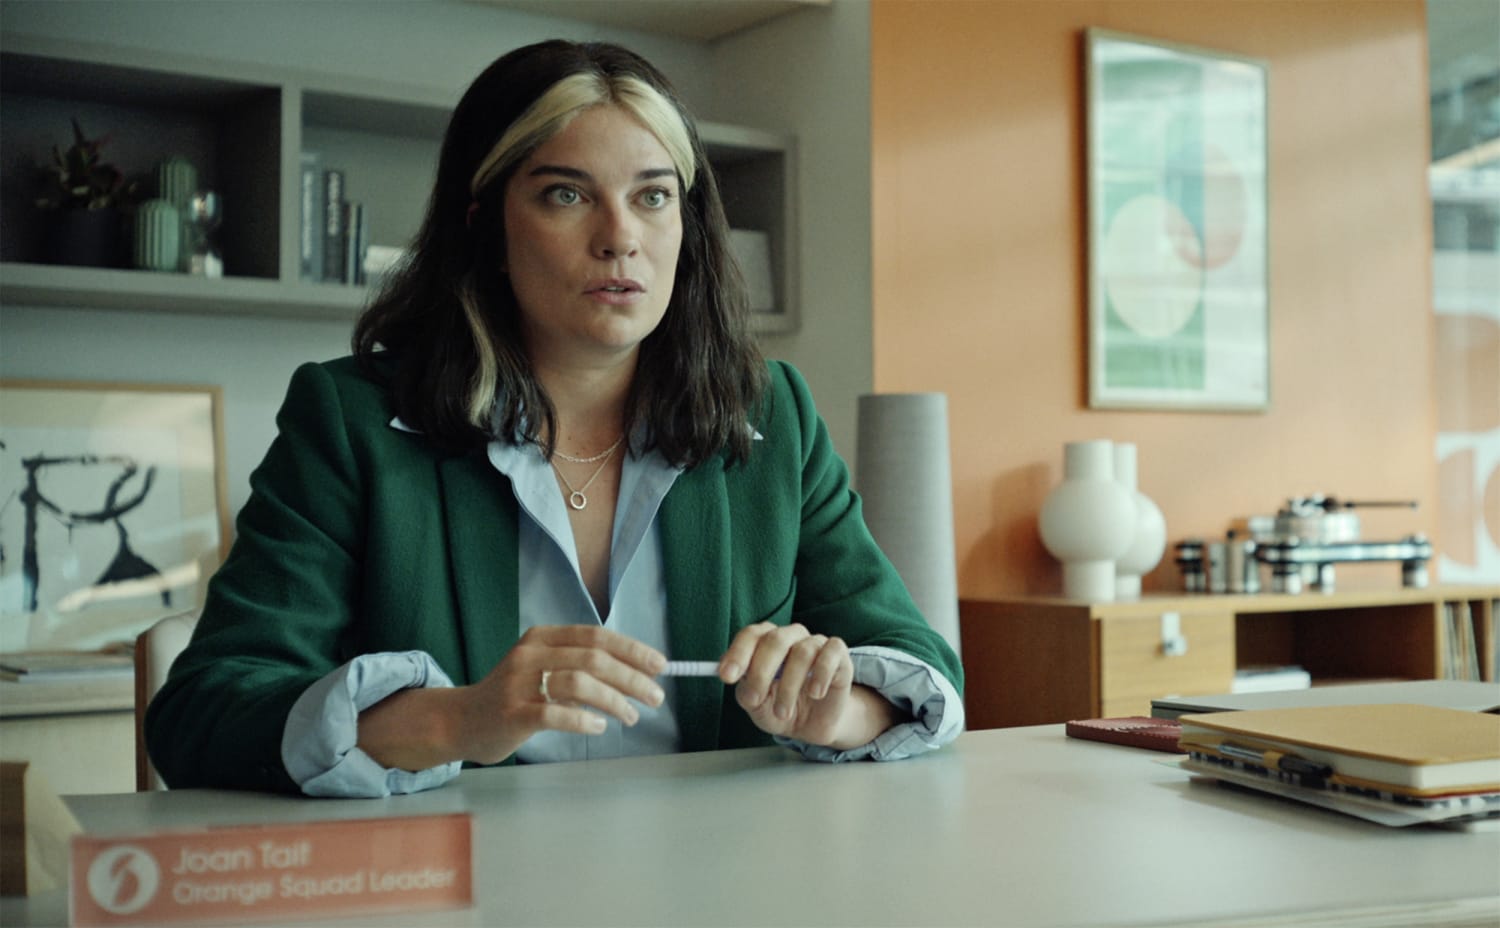 Black Mirror: Annie Murphy, “Joan Is Awful” Director on Timely